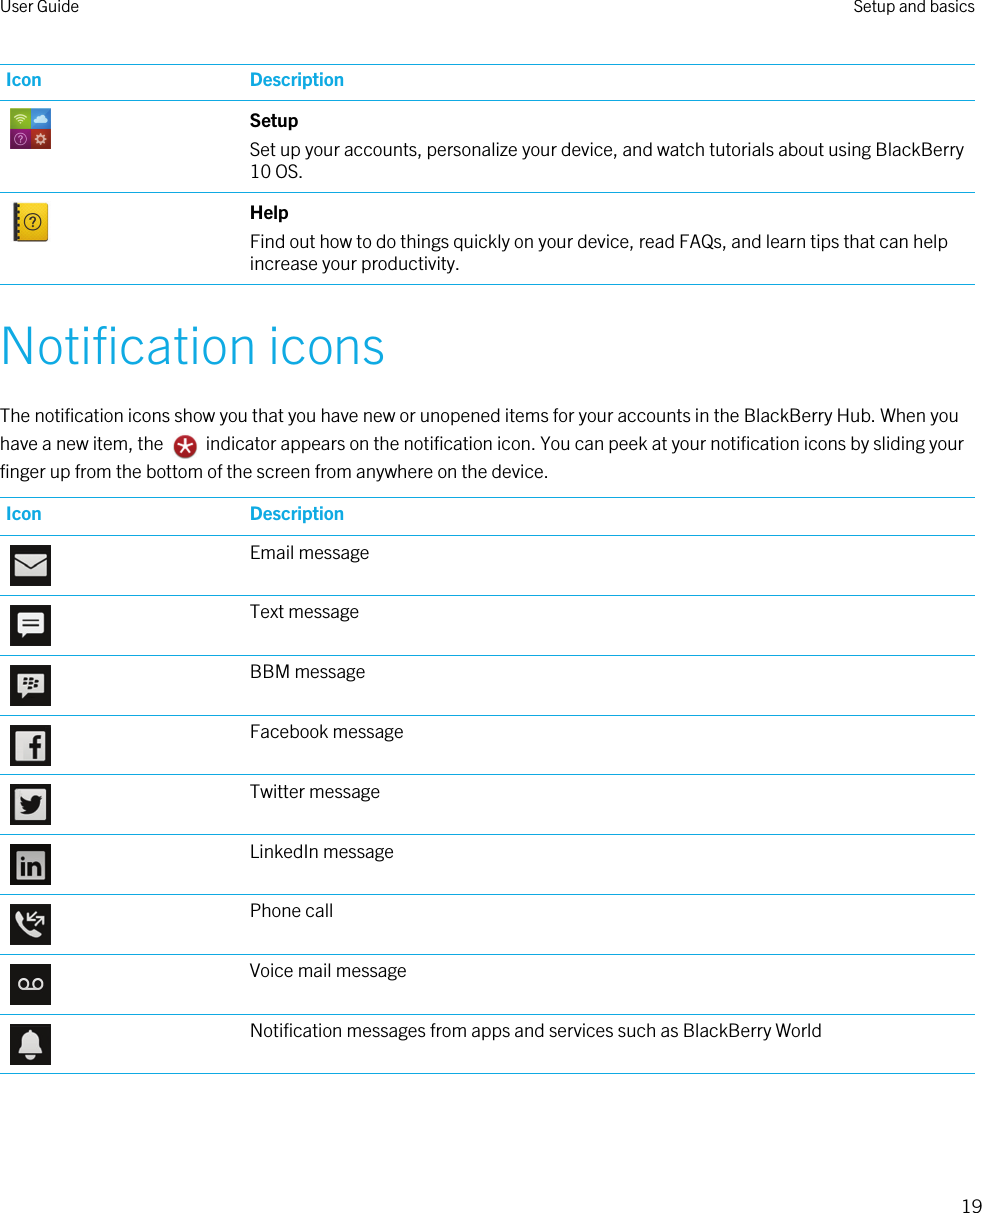 Icon DescriptionSetupSet up your accounts, personalize your device, and watch tutorials about using BlackBerry 10 OS.HelpFind out how to do things quickly on your device, read FAQs, and learn tips that can help increase your productivity.Notification iconsThe notification icons show you that you have new or unopened items for your accounts in the BlackBerry Hub. When you have a new item, the   indicator appears on the notification icon. You can peek at your notification icons by sliding your finger up from the bottom of the screen from anywhere on the device.Icon DescriptionEmail messageText messageBBM messageFacebook messageTwitter messageLinkedIn messagePhone callVoice mail messageNotification messages from apps and services such as BlackBerry WorldUser Guide Setup and basics19